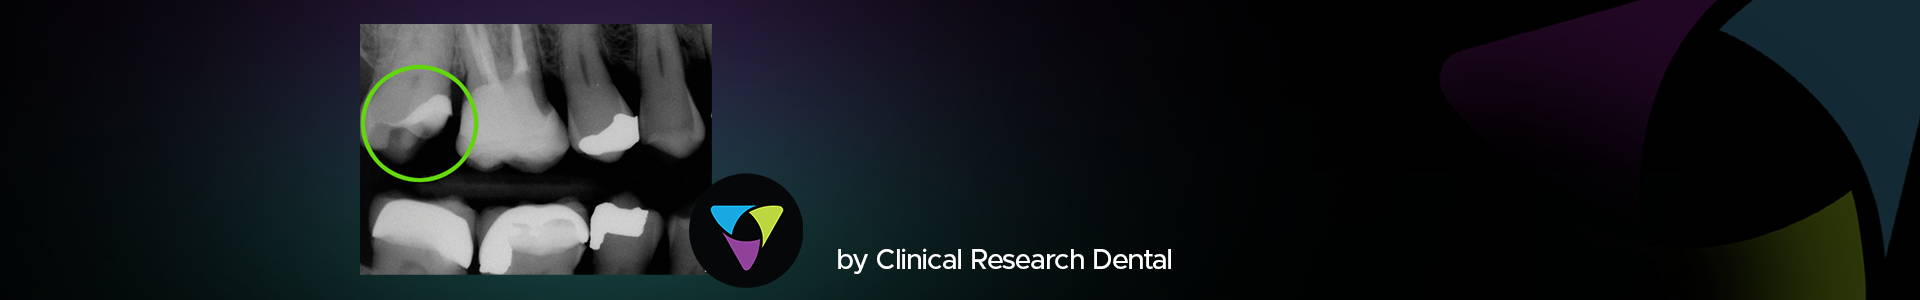 blog banner with dental x-ray and Clinical Research Dental logo